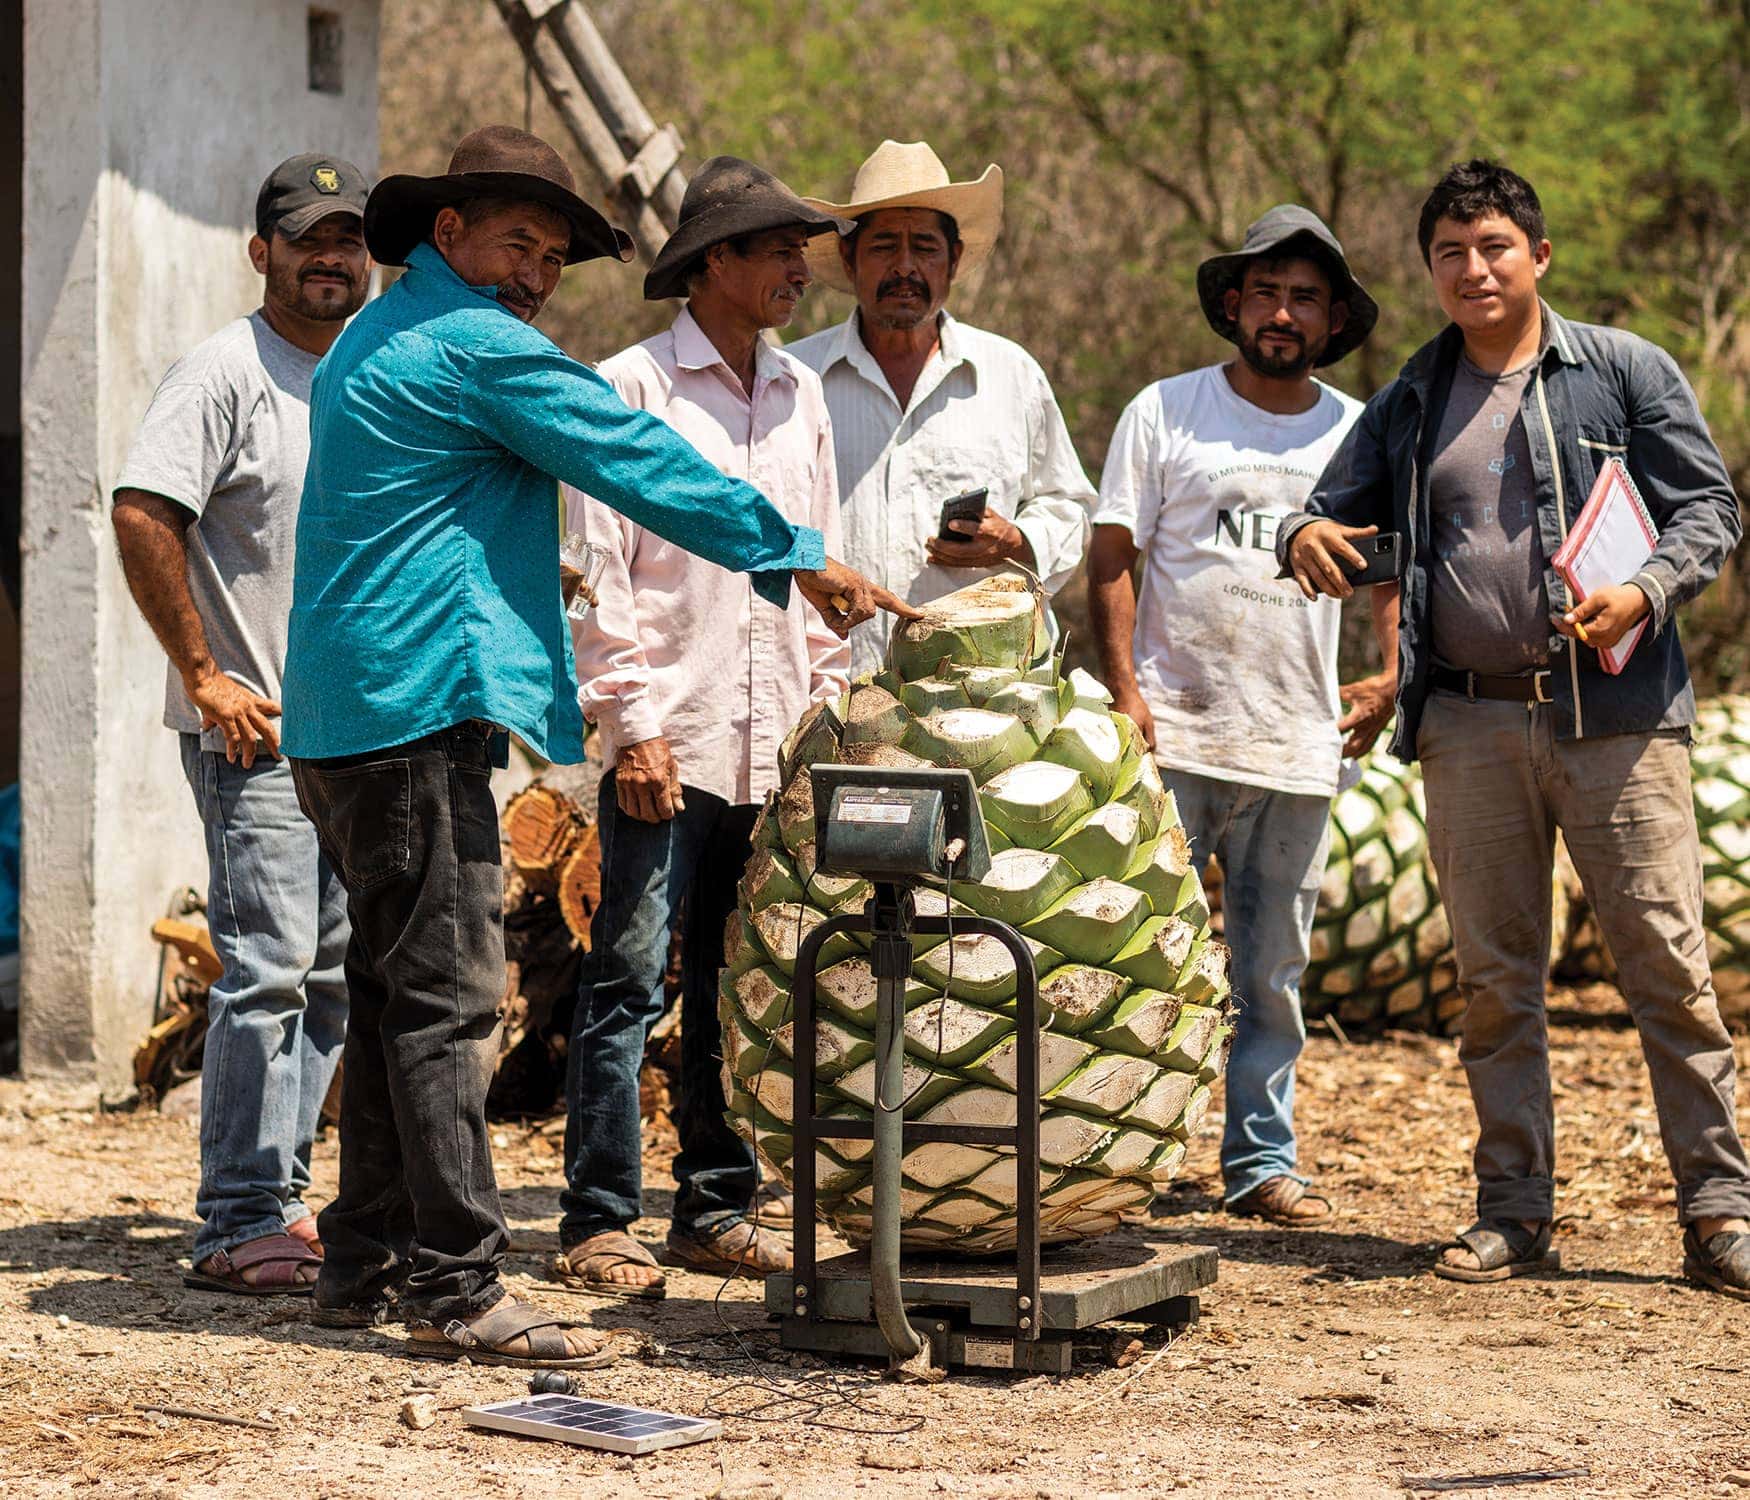 Getting to Know Family-Made Mezcal